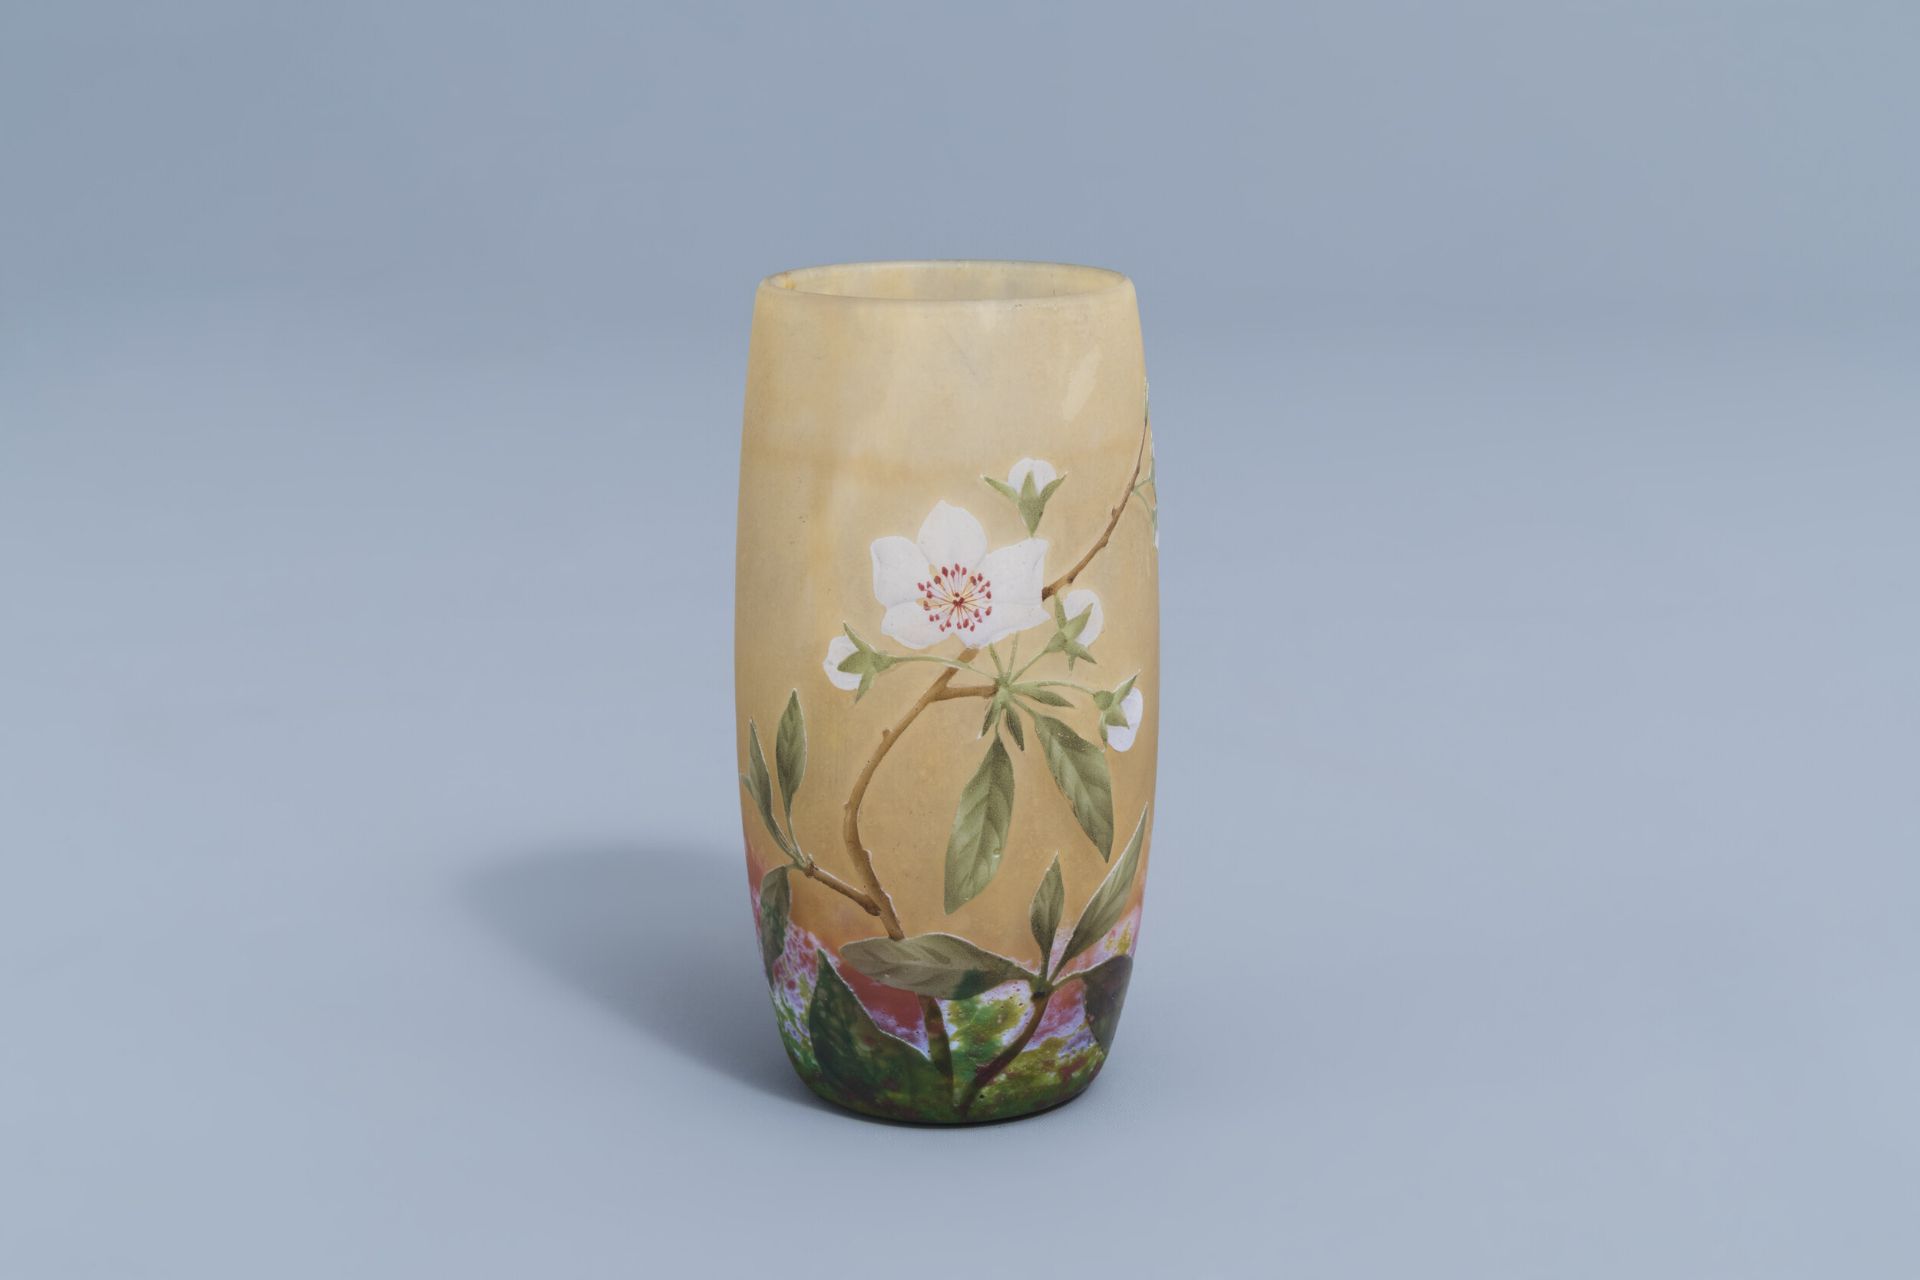 A French Art Nouveau etched overlay glass vase with floral design, Daum Nancy, first half of the 20t